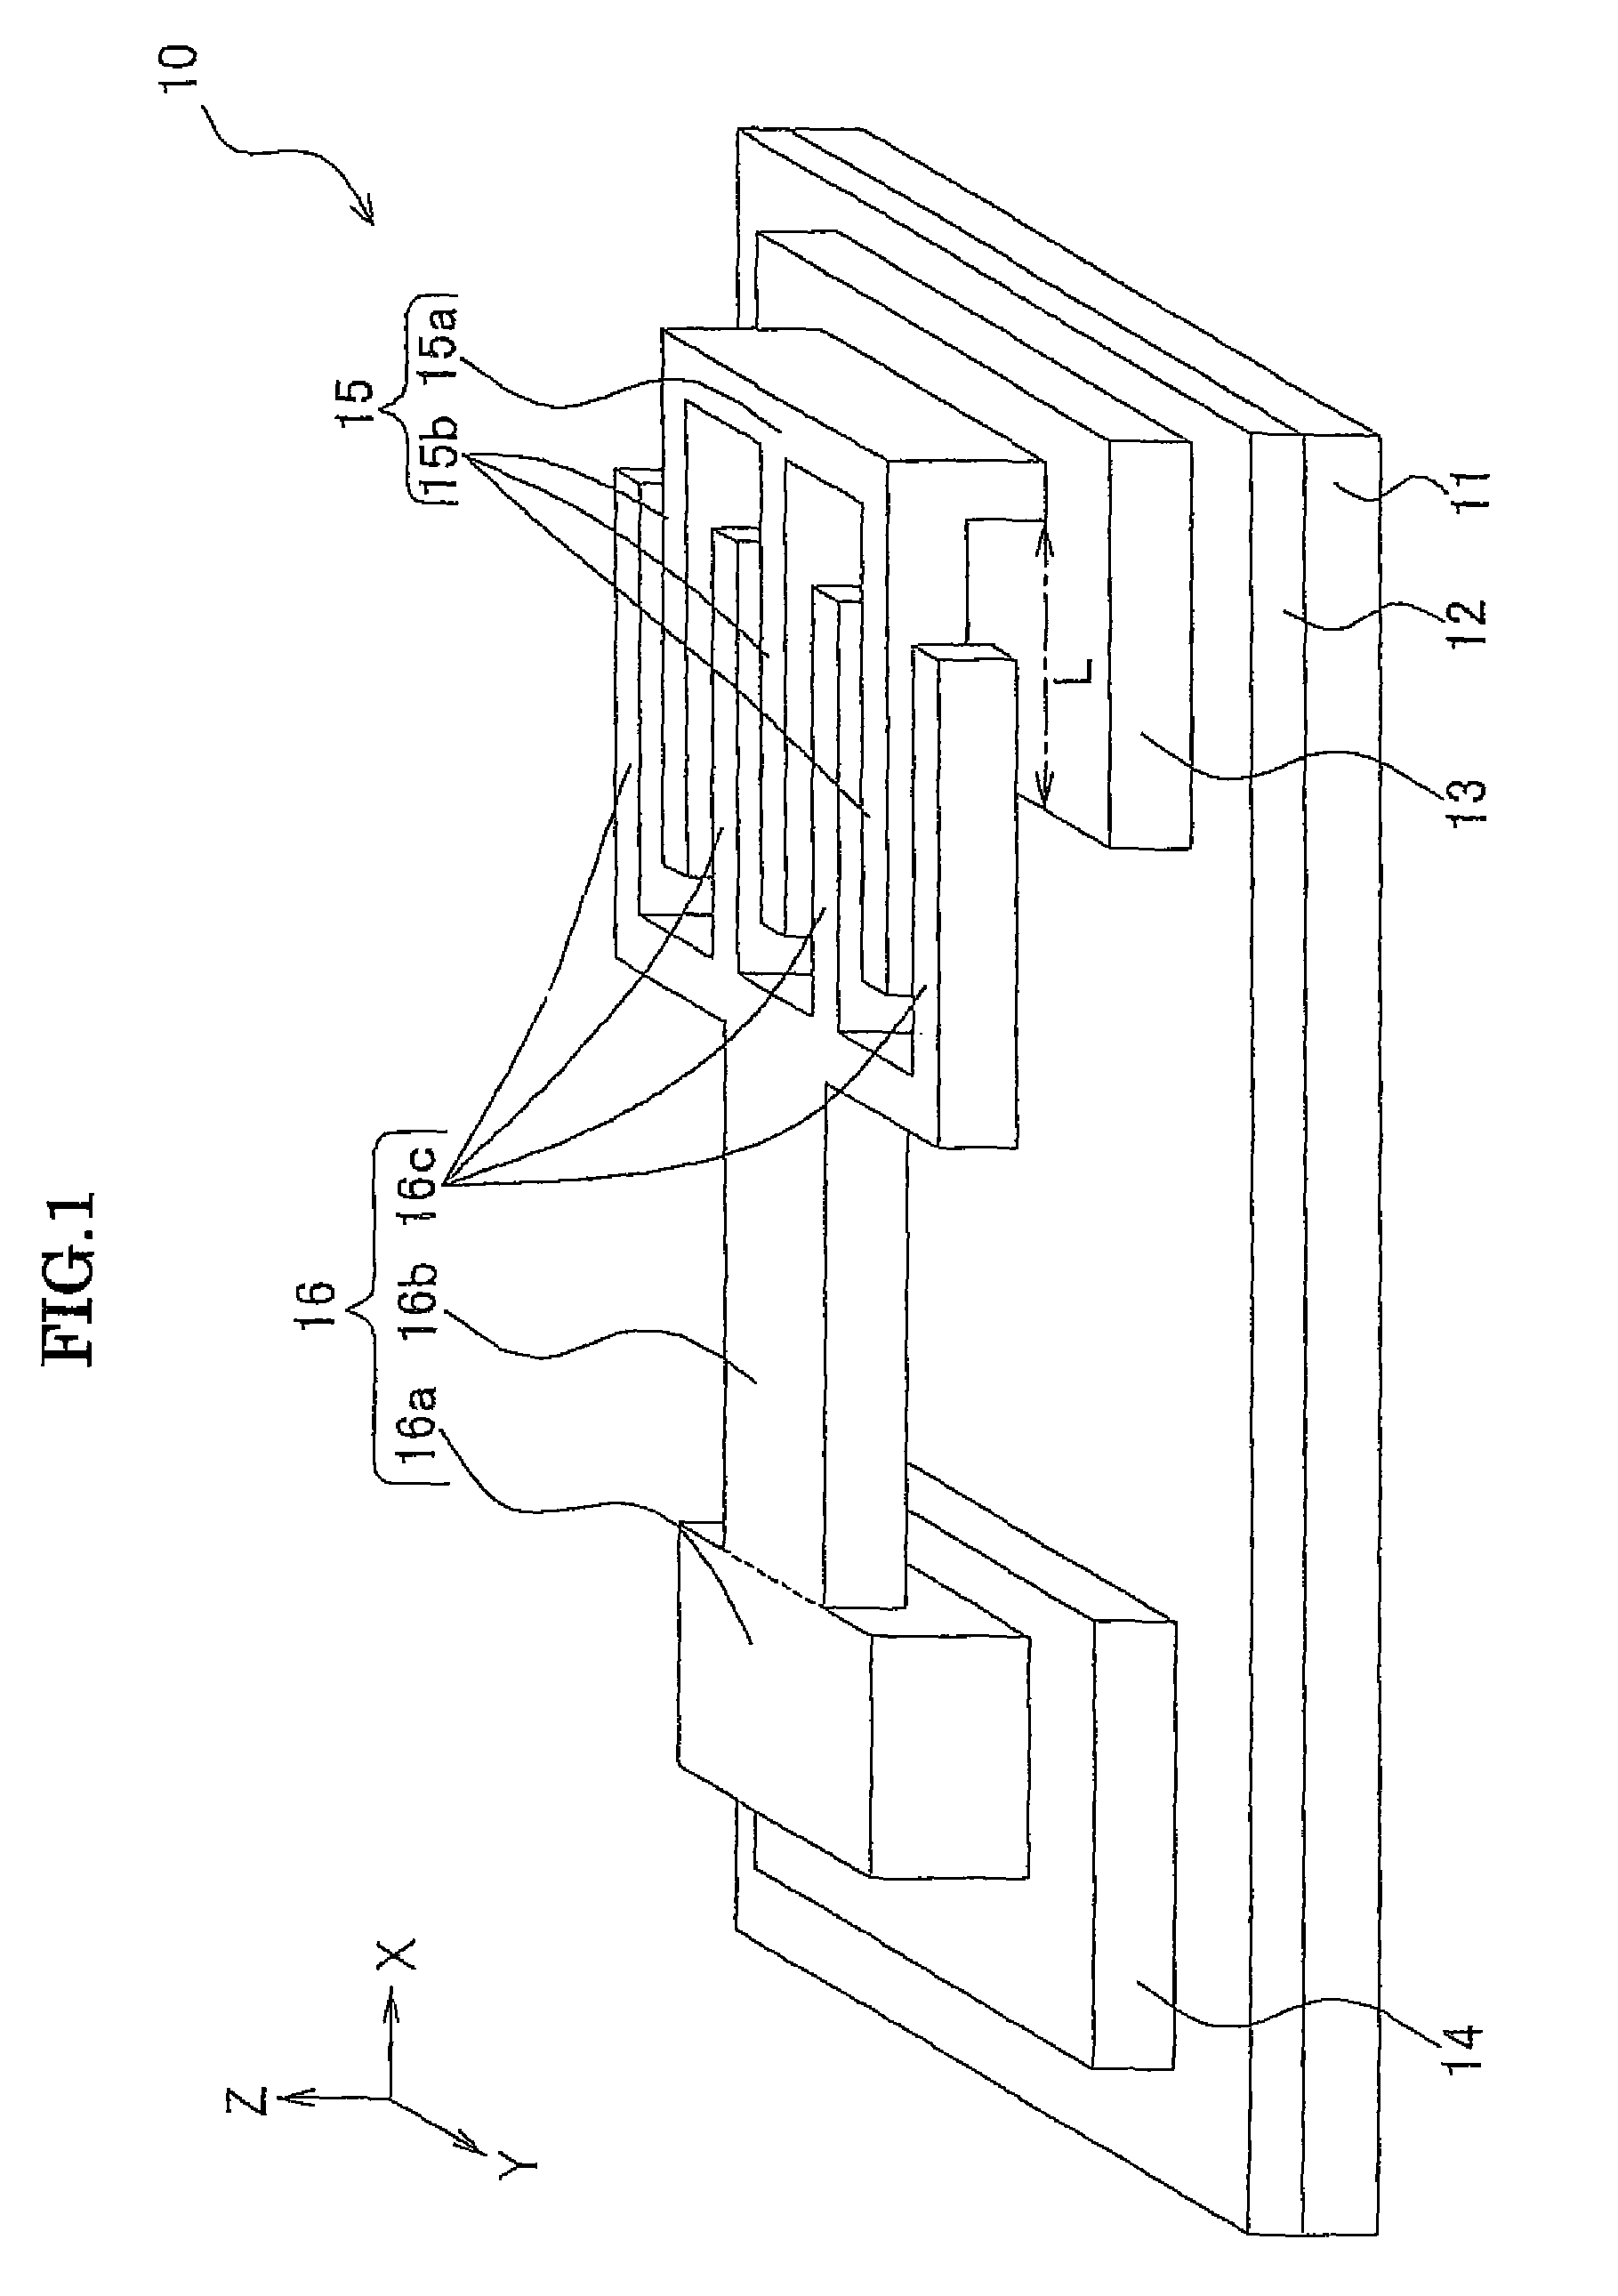 Resonator having an output electrode underneath first and second electrode arms